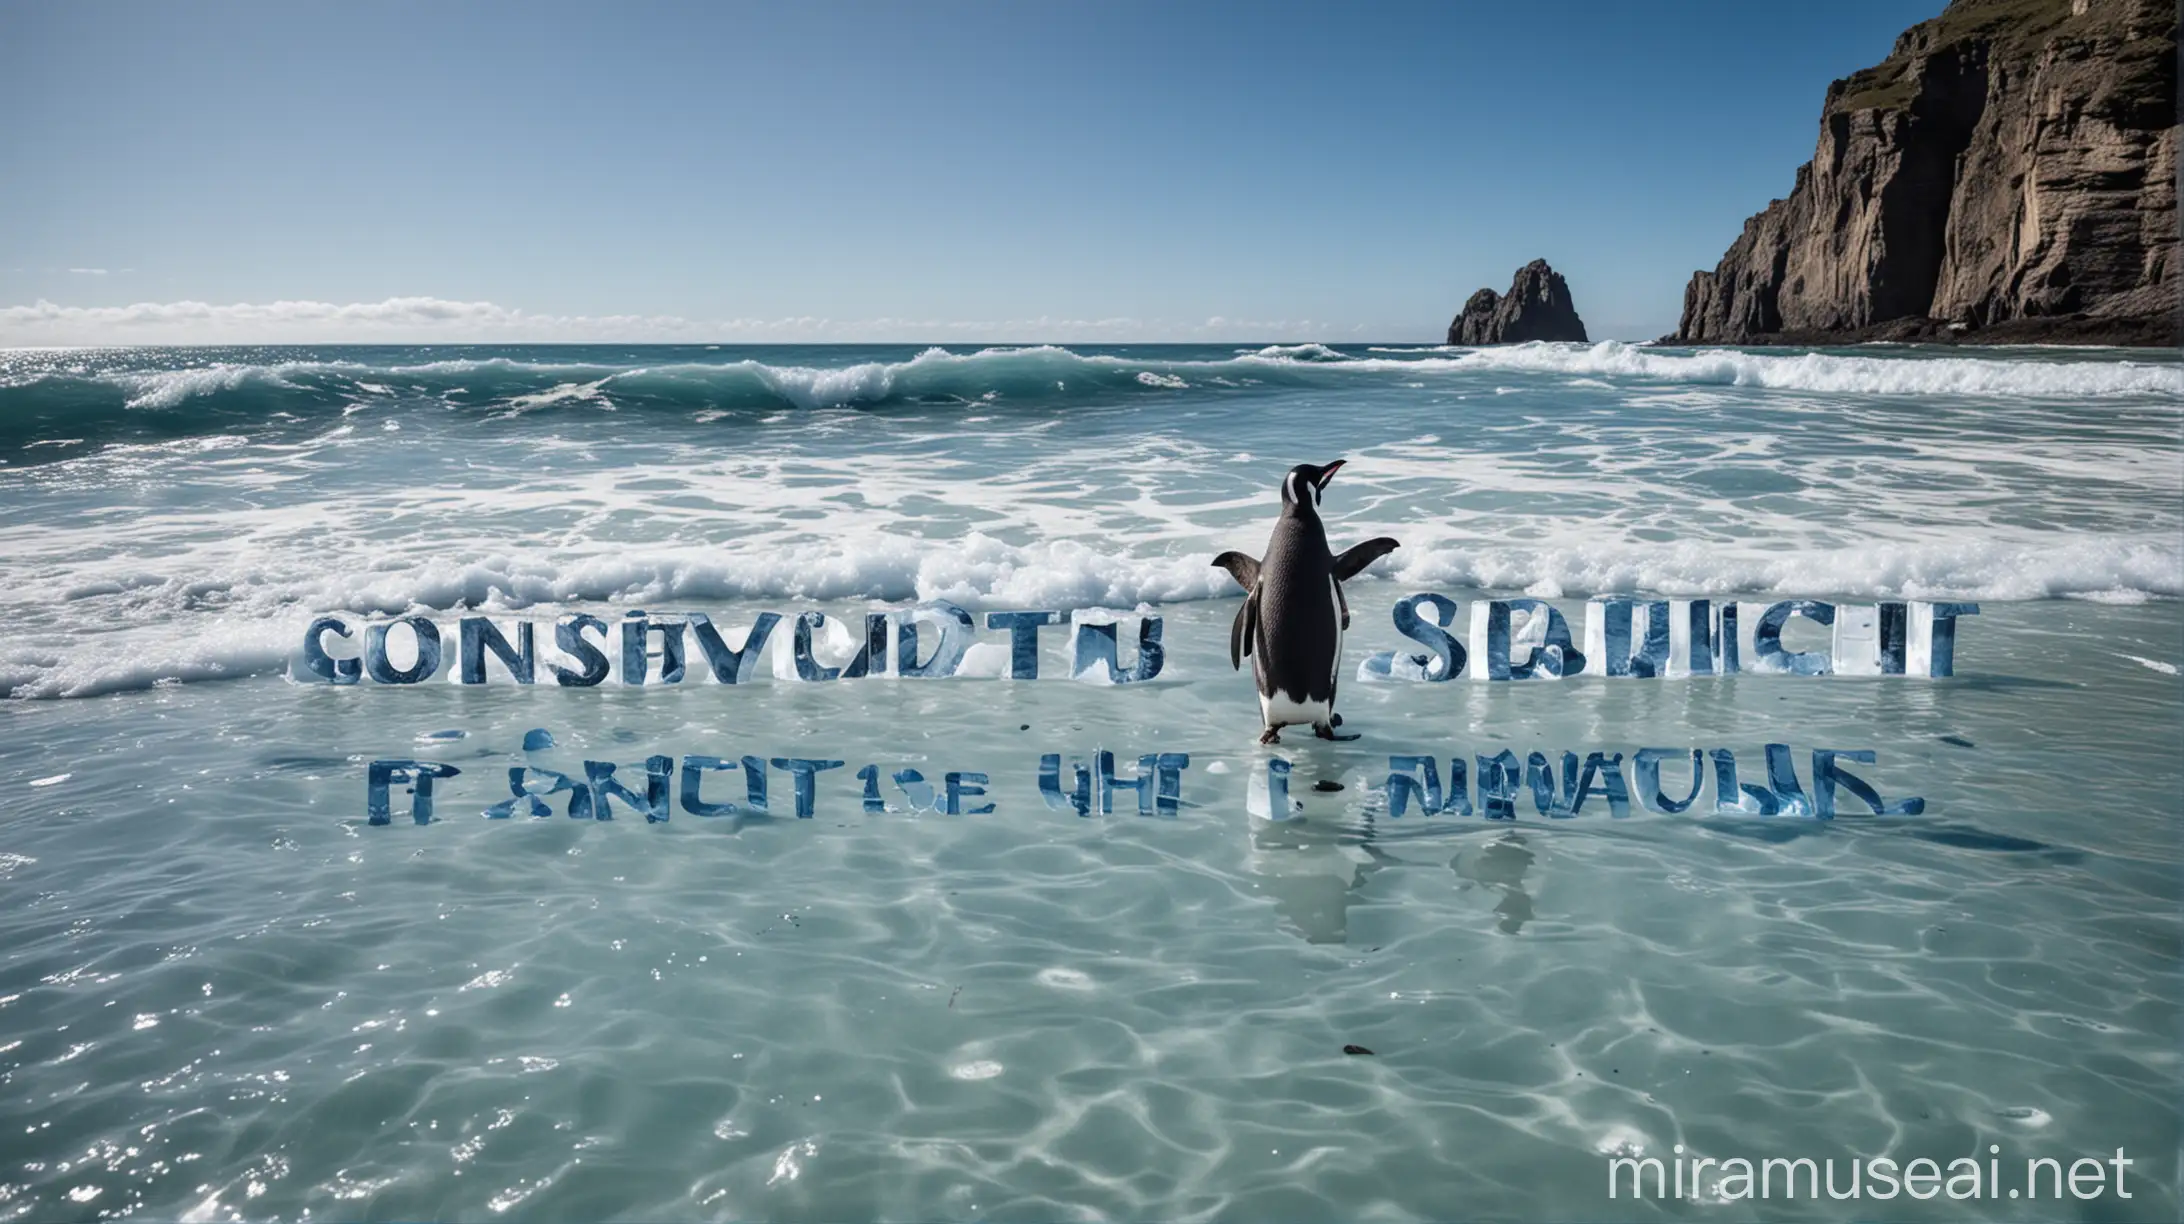 A penguin is playing at the edge of an unpolluted blue ocean, and behind them is a conservation slogan made of ice-sculptured Chinese characters 'protect the ocean, penguins have responsibility'.